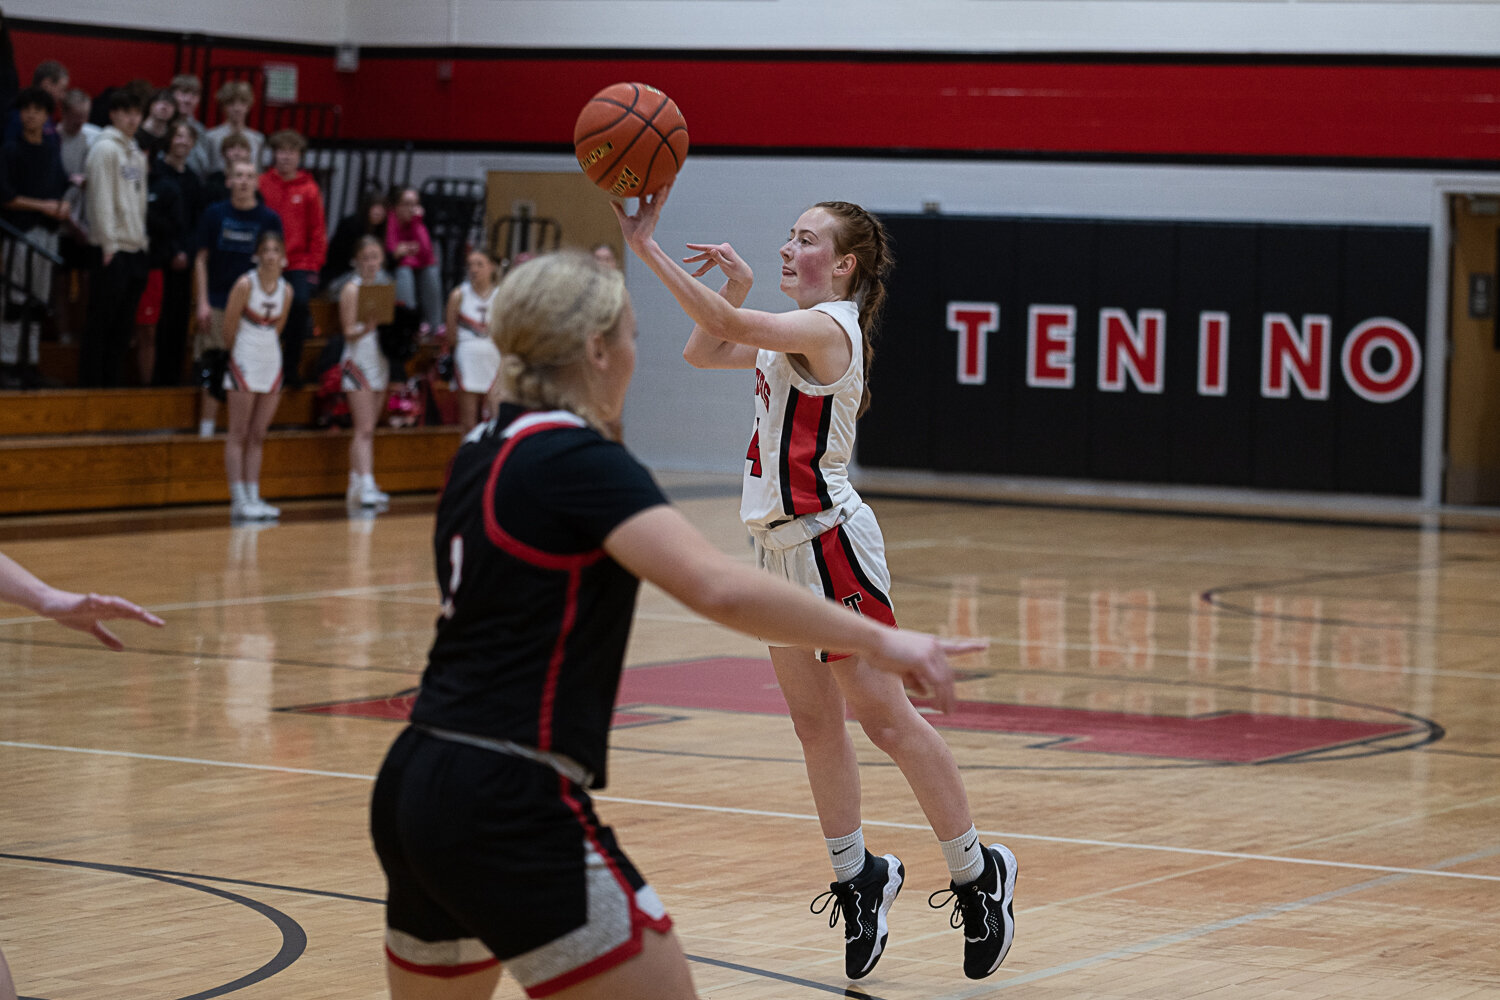 Brynn Williams fires an open three during Tenino's loss to Toledo on Nov. 29.